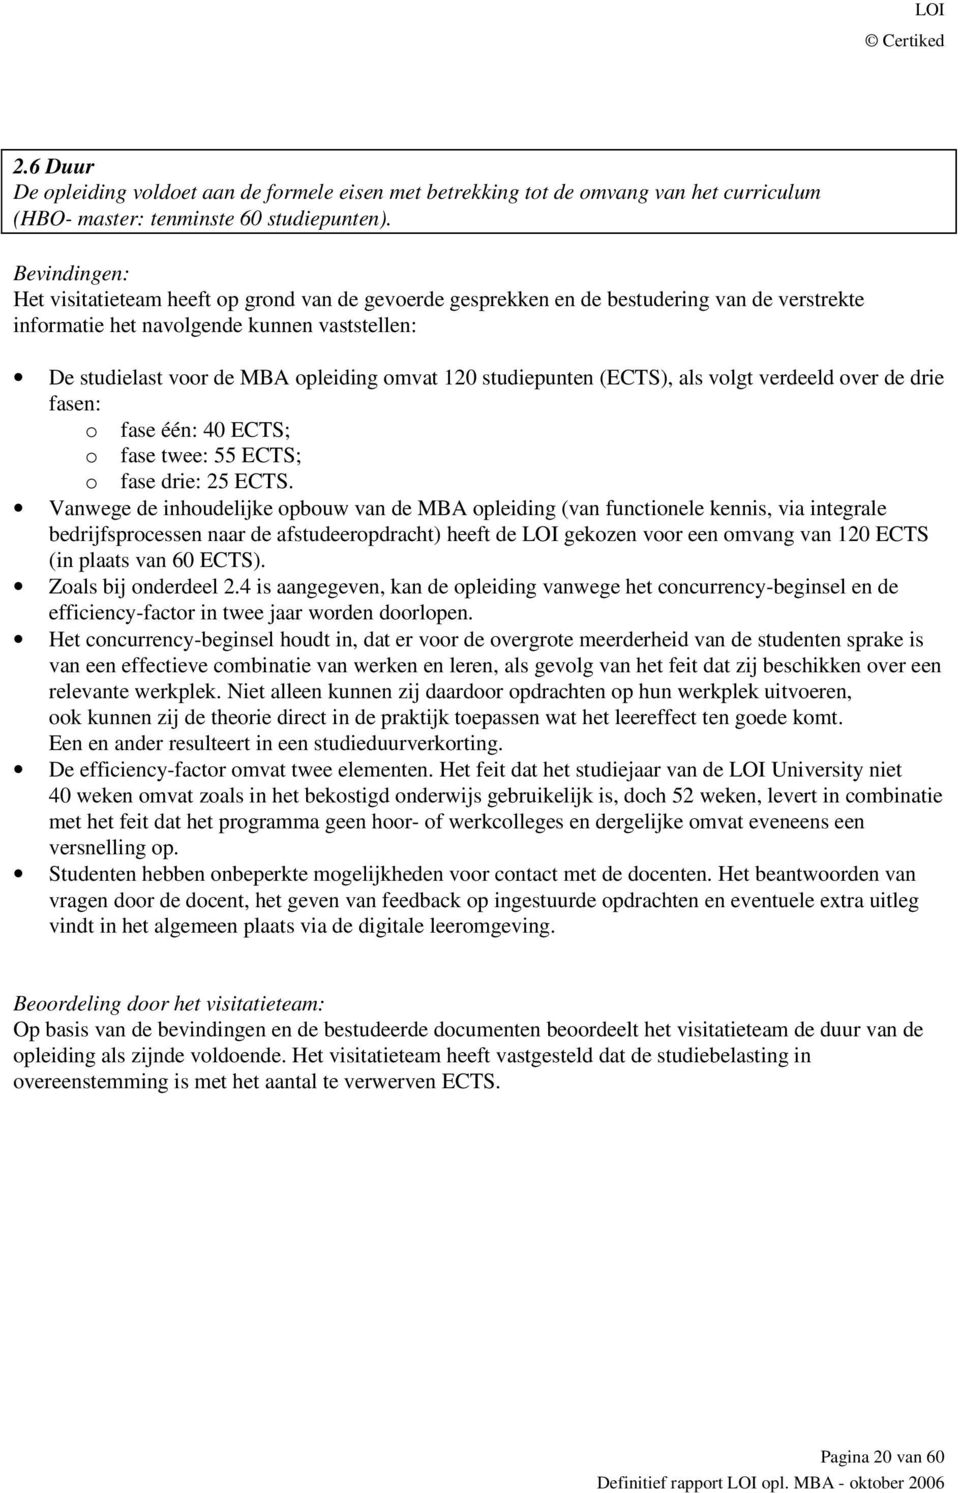 120 studiepunten (ECTS), als volgt verdeeld over de drie fasen: o fase één: 40 ECTS; o fase twee: 55 ECTS; o fase drie: 25 ECTS.